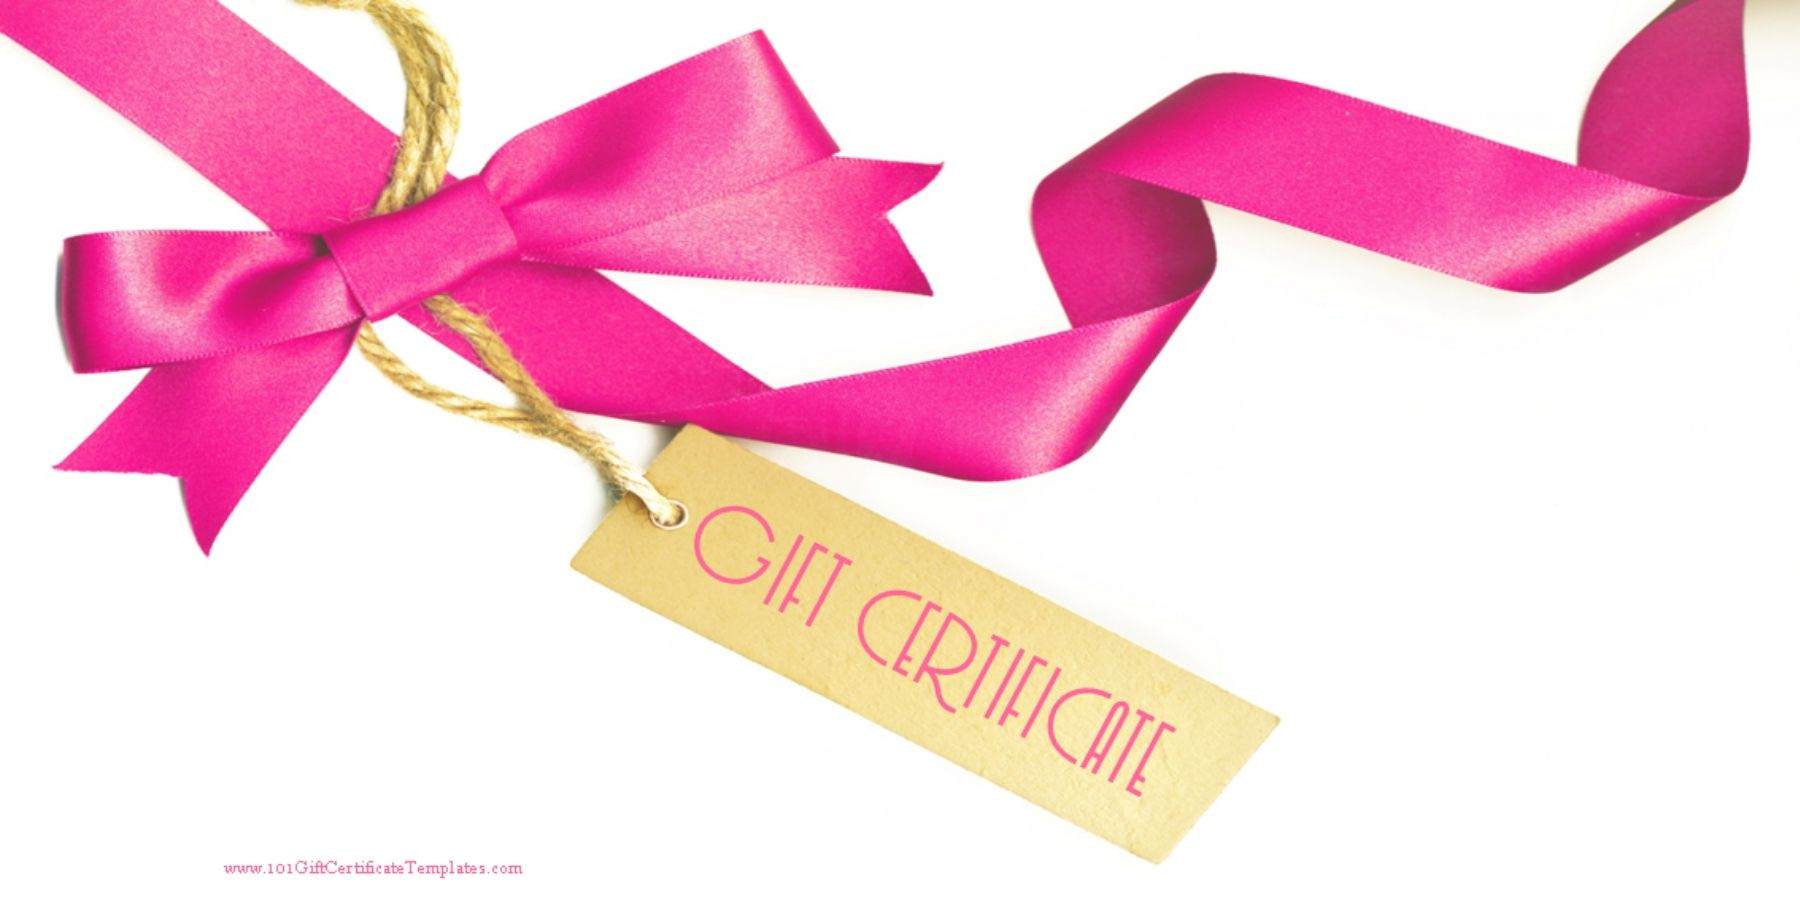 Gift Certificate With A White Background And A Pink Ribbon Pertaining To Pink Gift Certificate Template